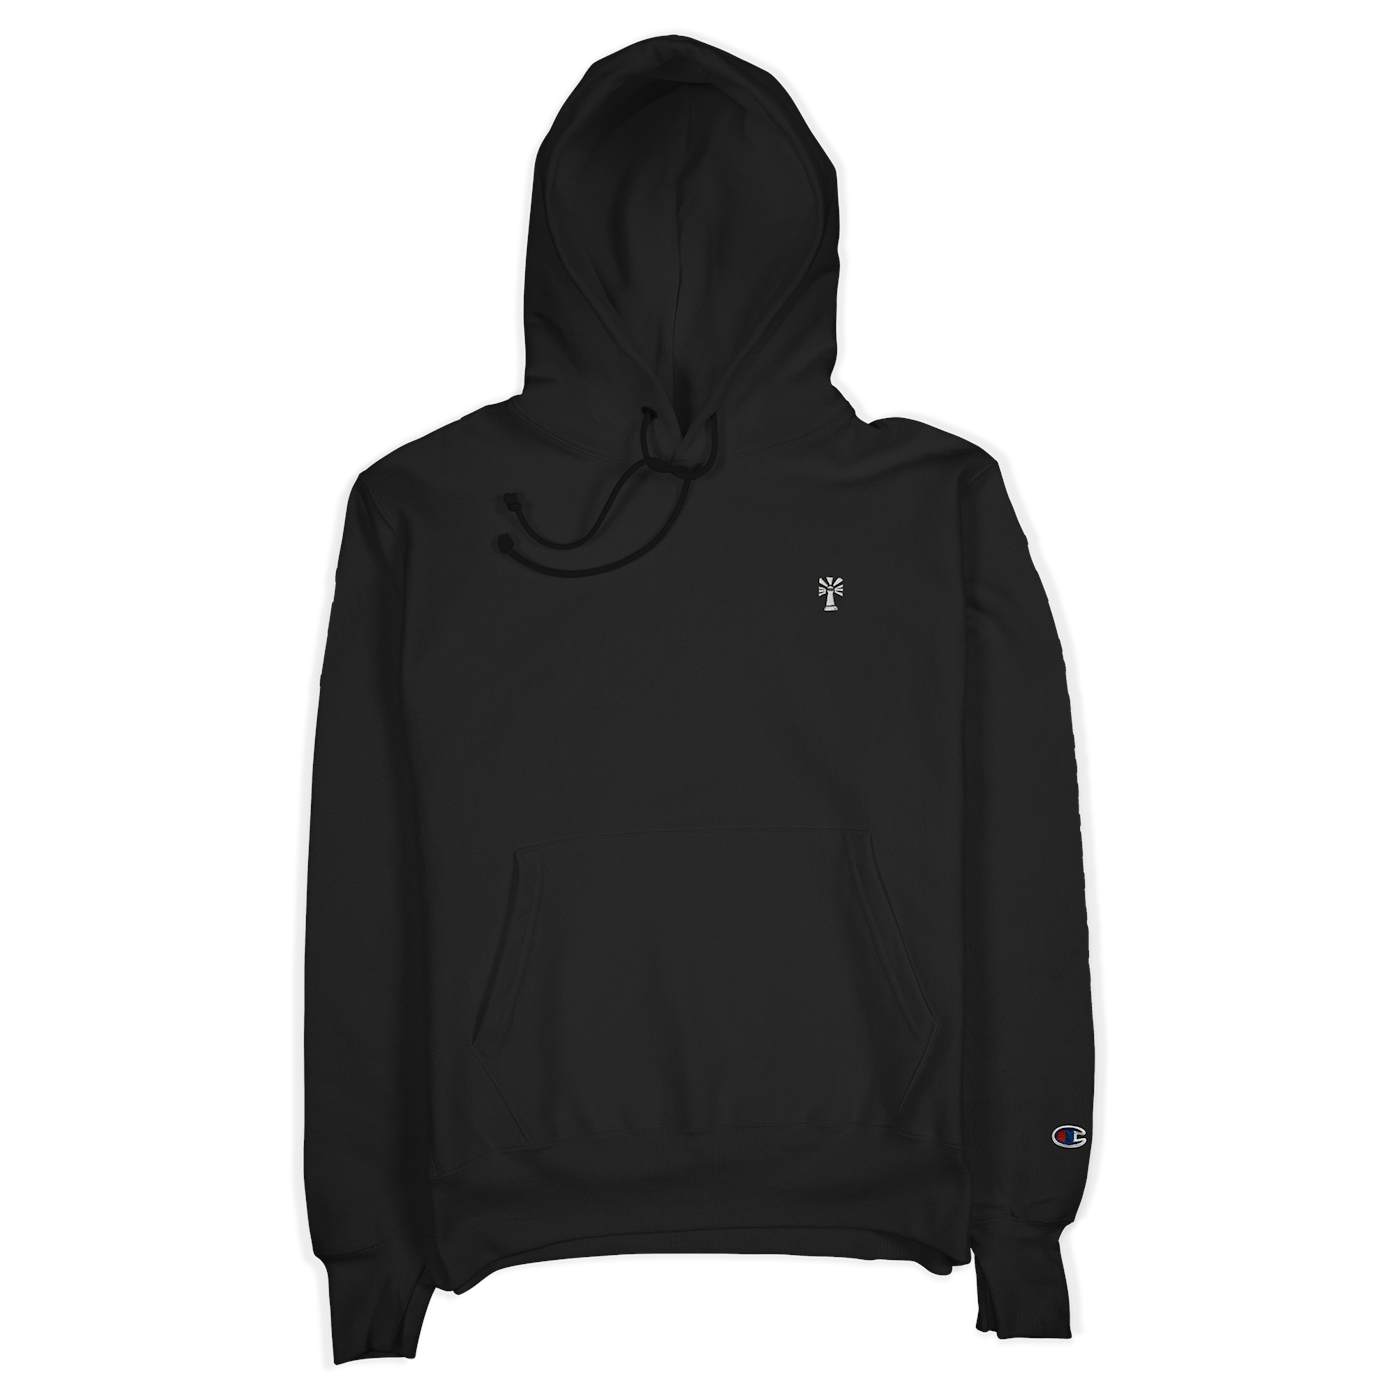 Stray From The Path - Internal Atomics Champion Hoodie (Black)